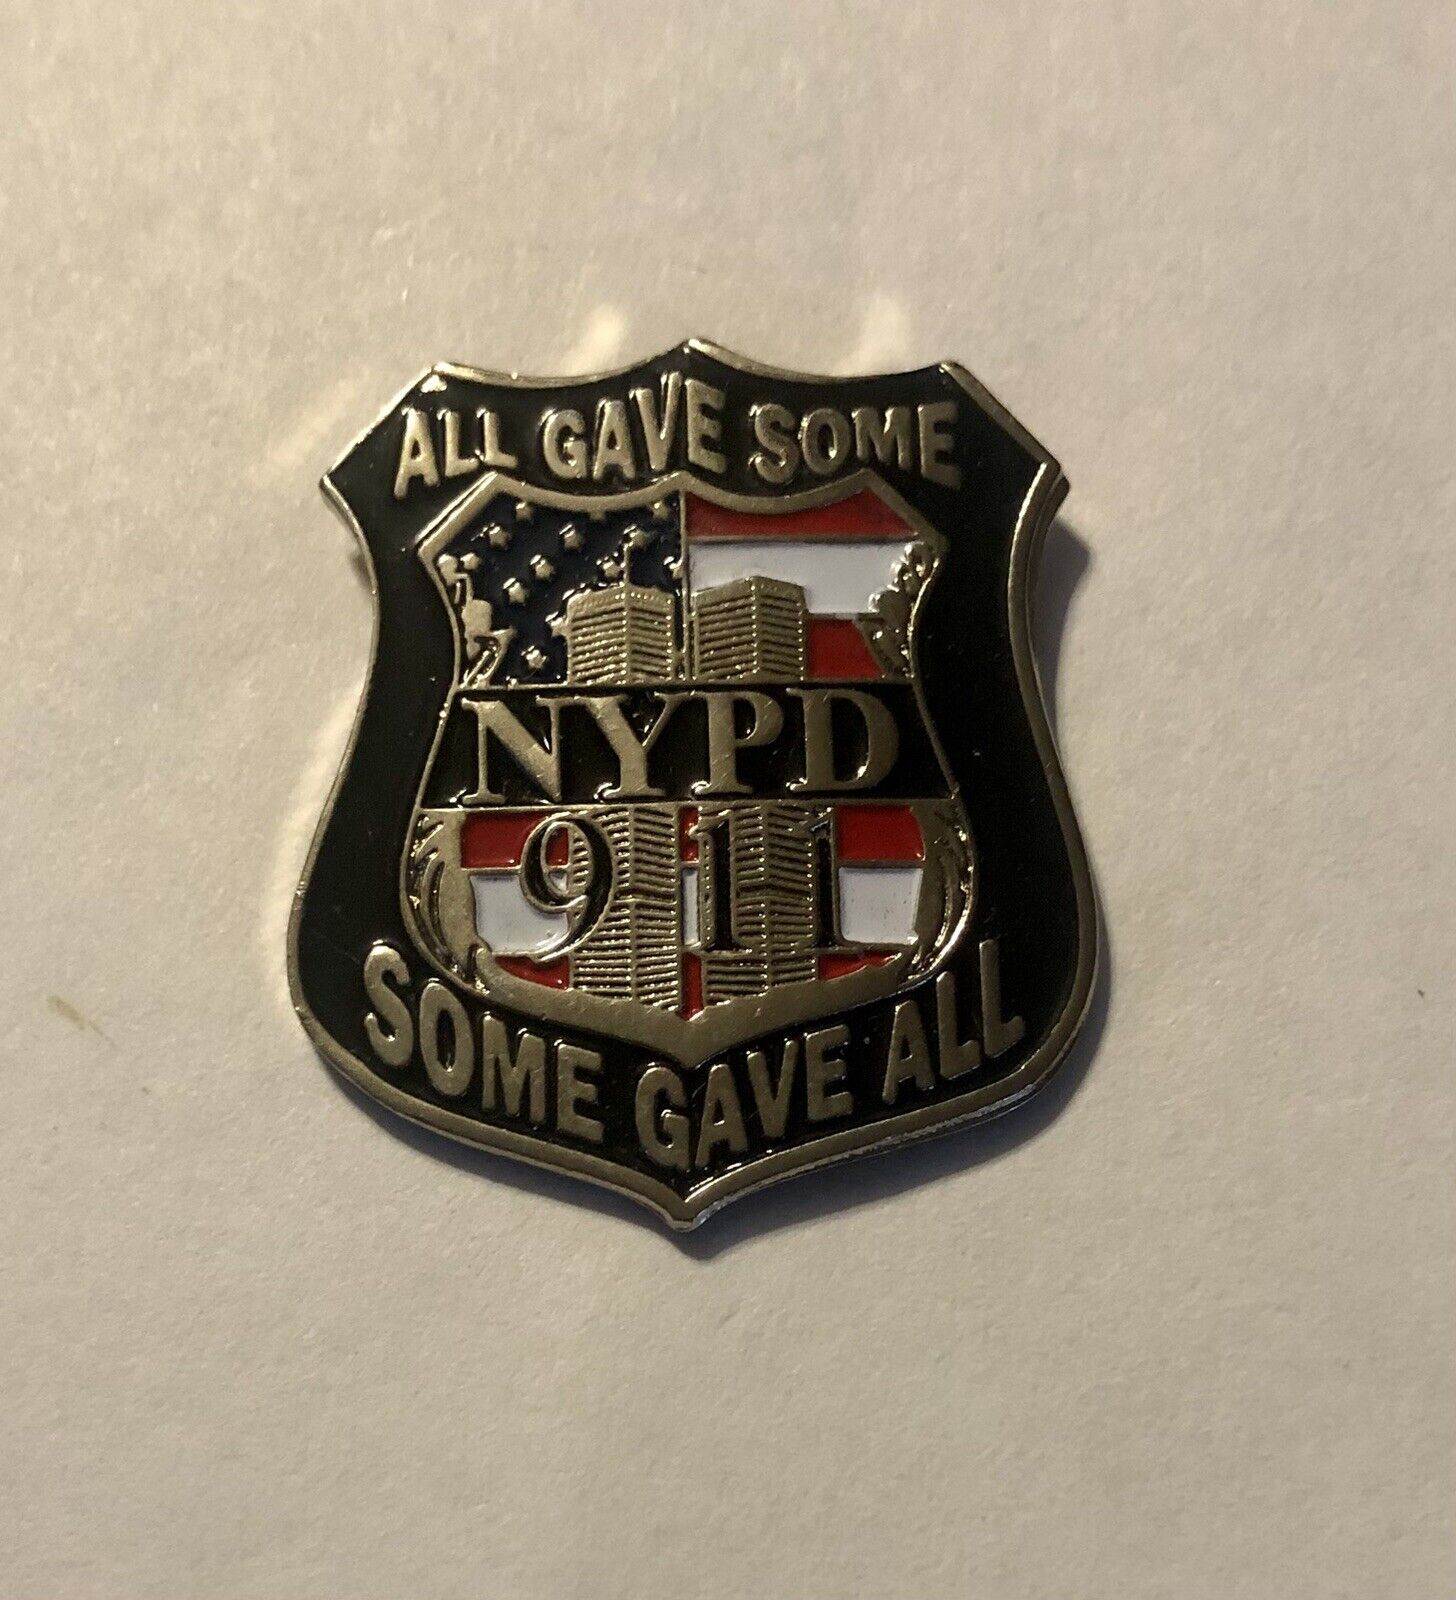 NYPD New York City Police Department “All Gave Some, Some Gave All” 9/11 Pin